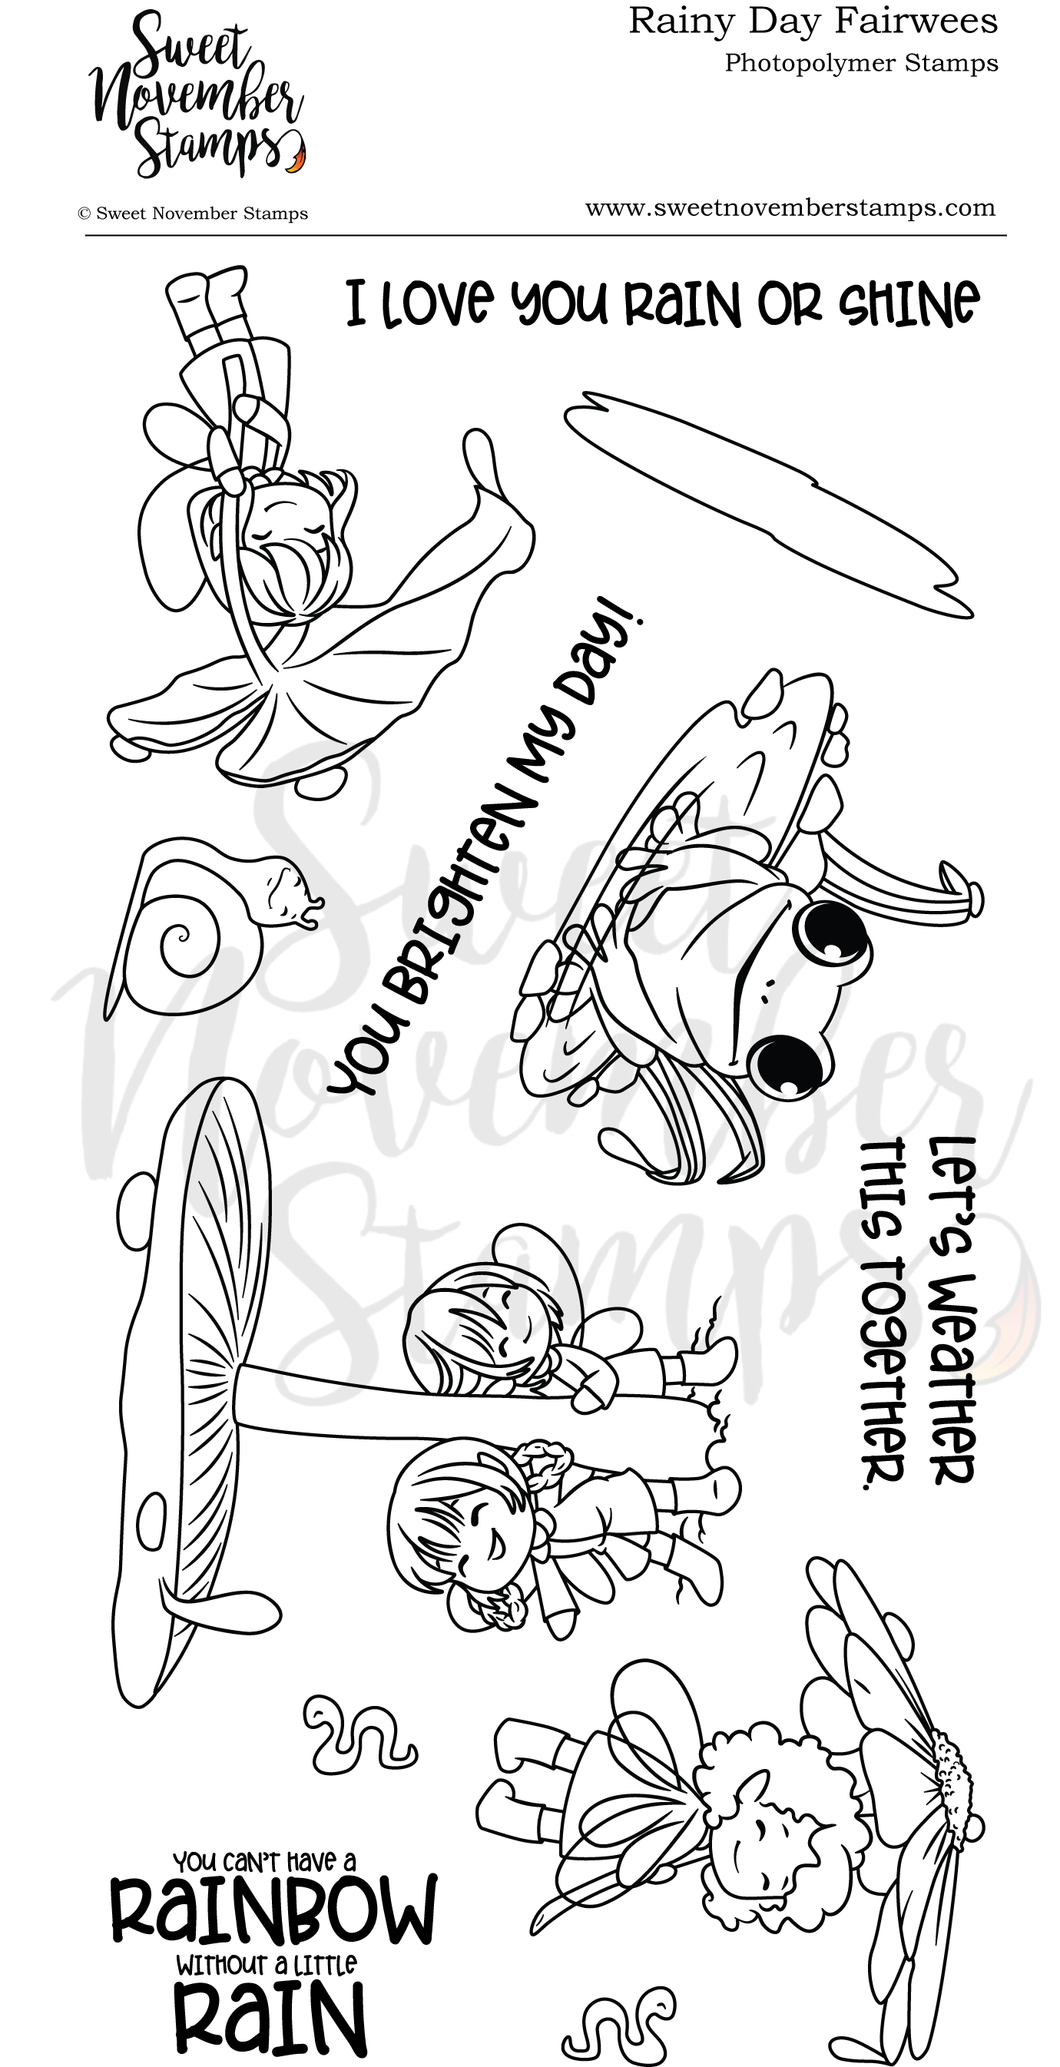 Clear Stamp Set - Rainy Day Fairwees